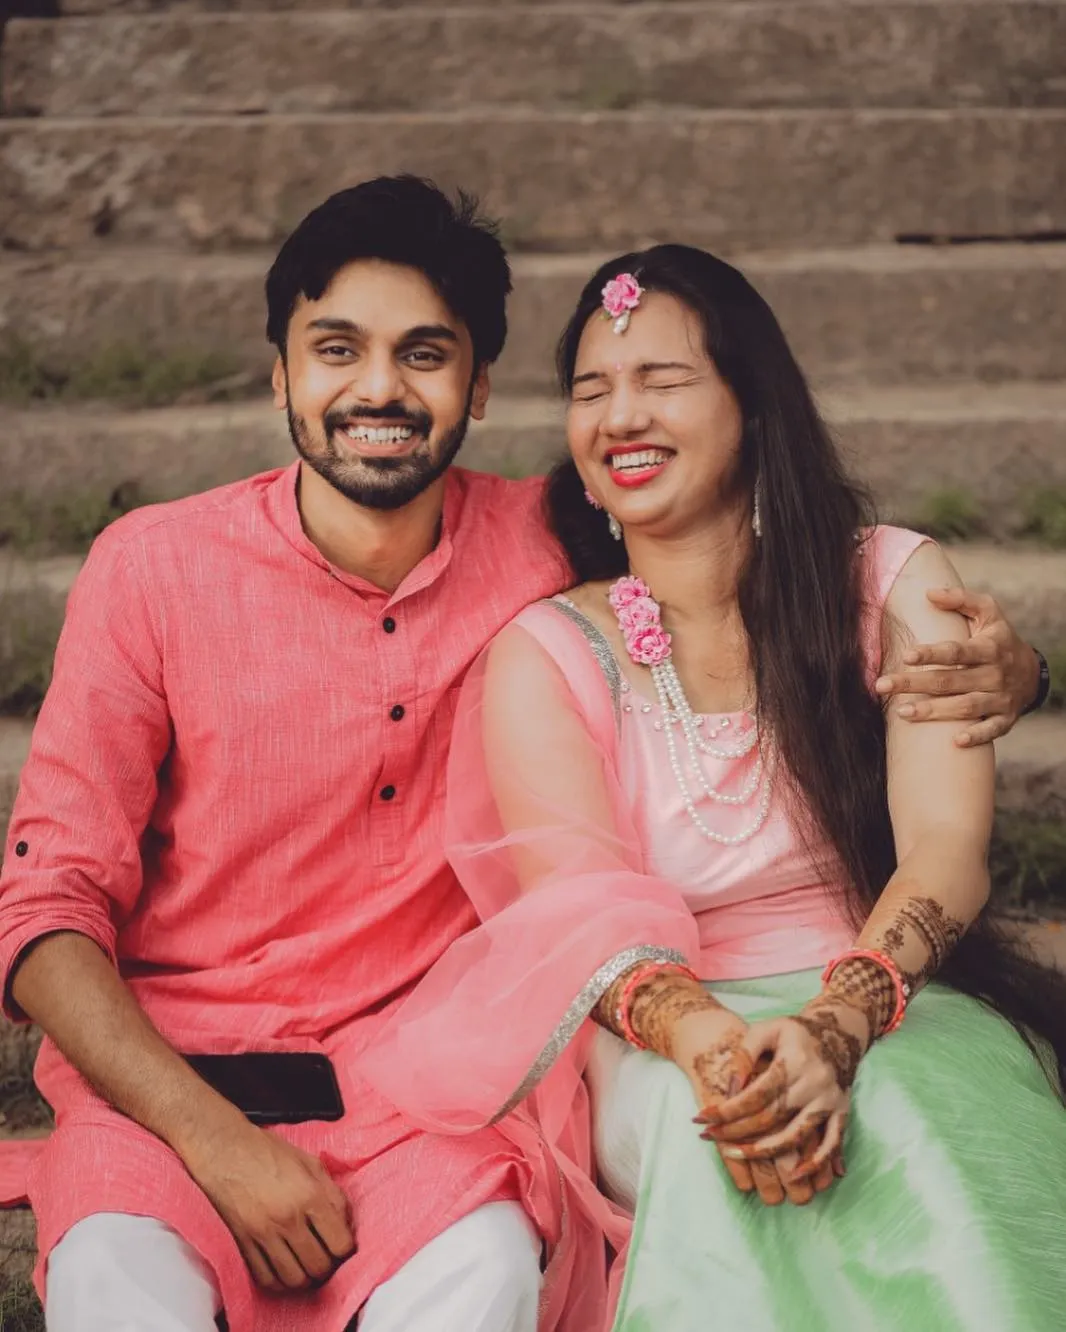 Raksha Bandhan Special 15 Things Every Girl Misses About Her Brother After Getting Married